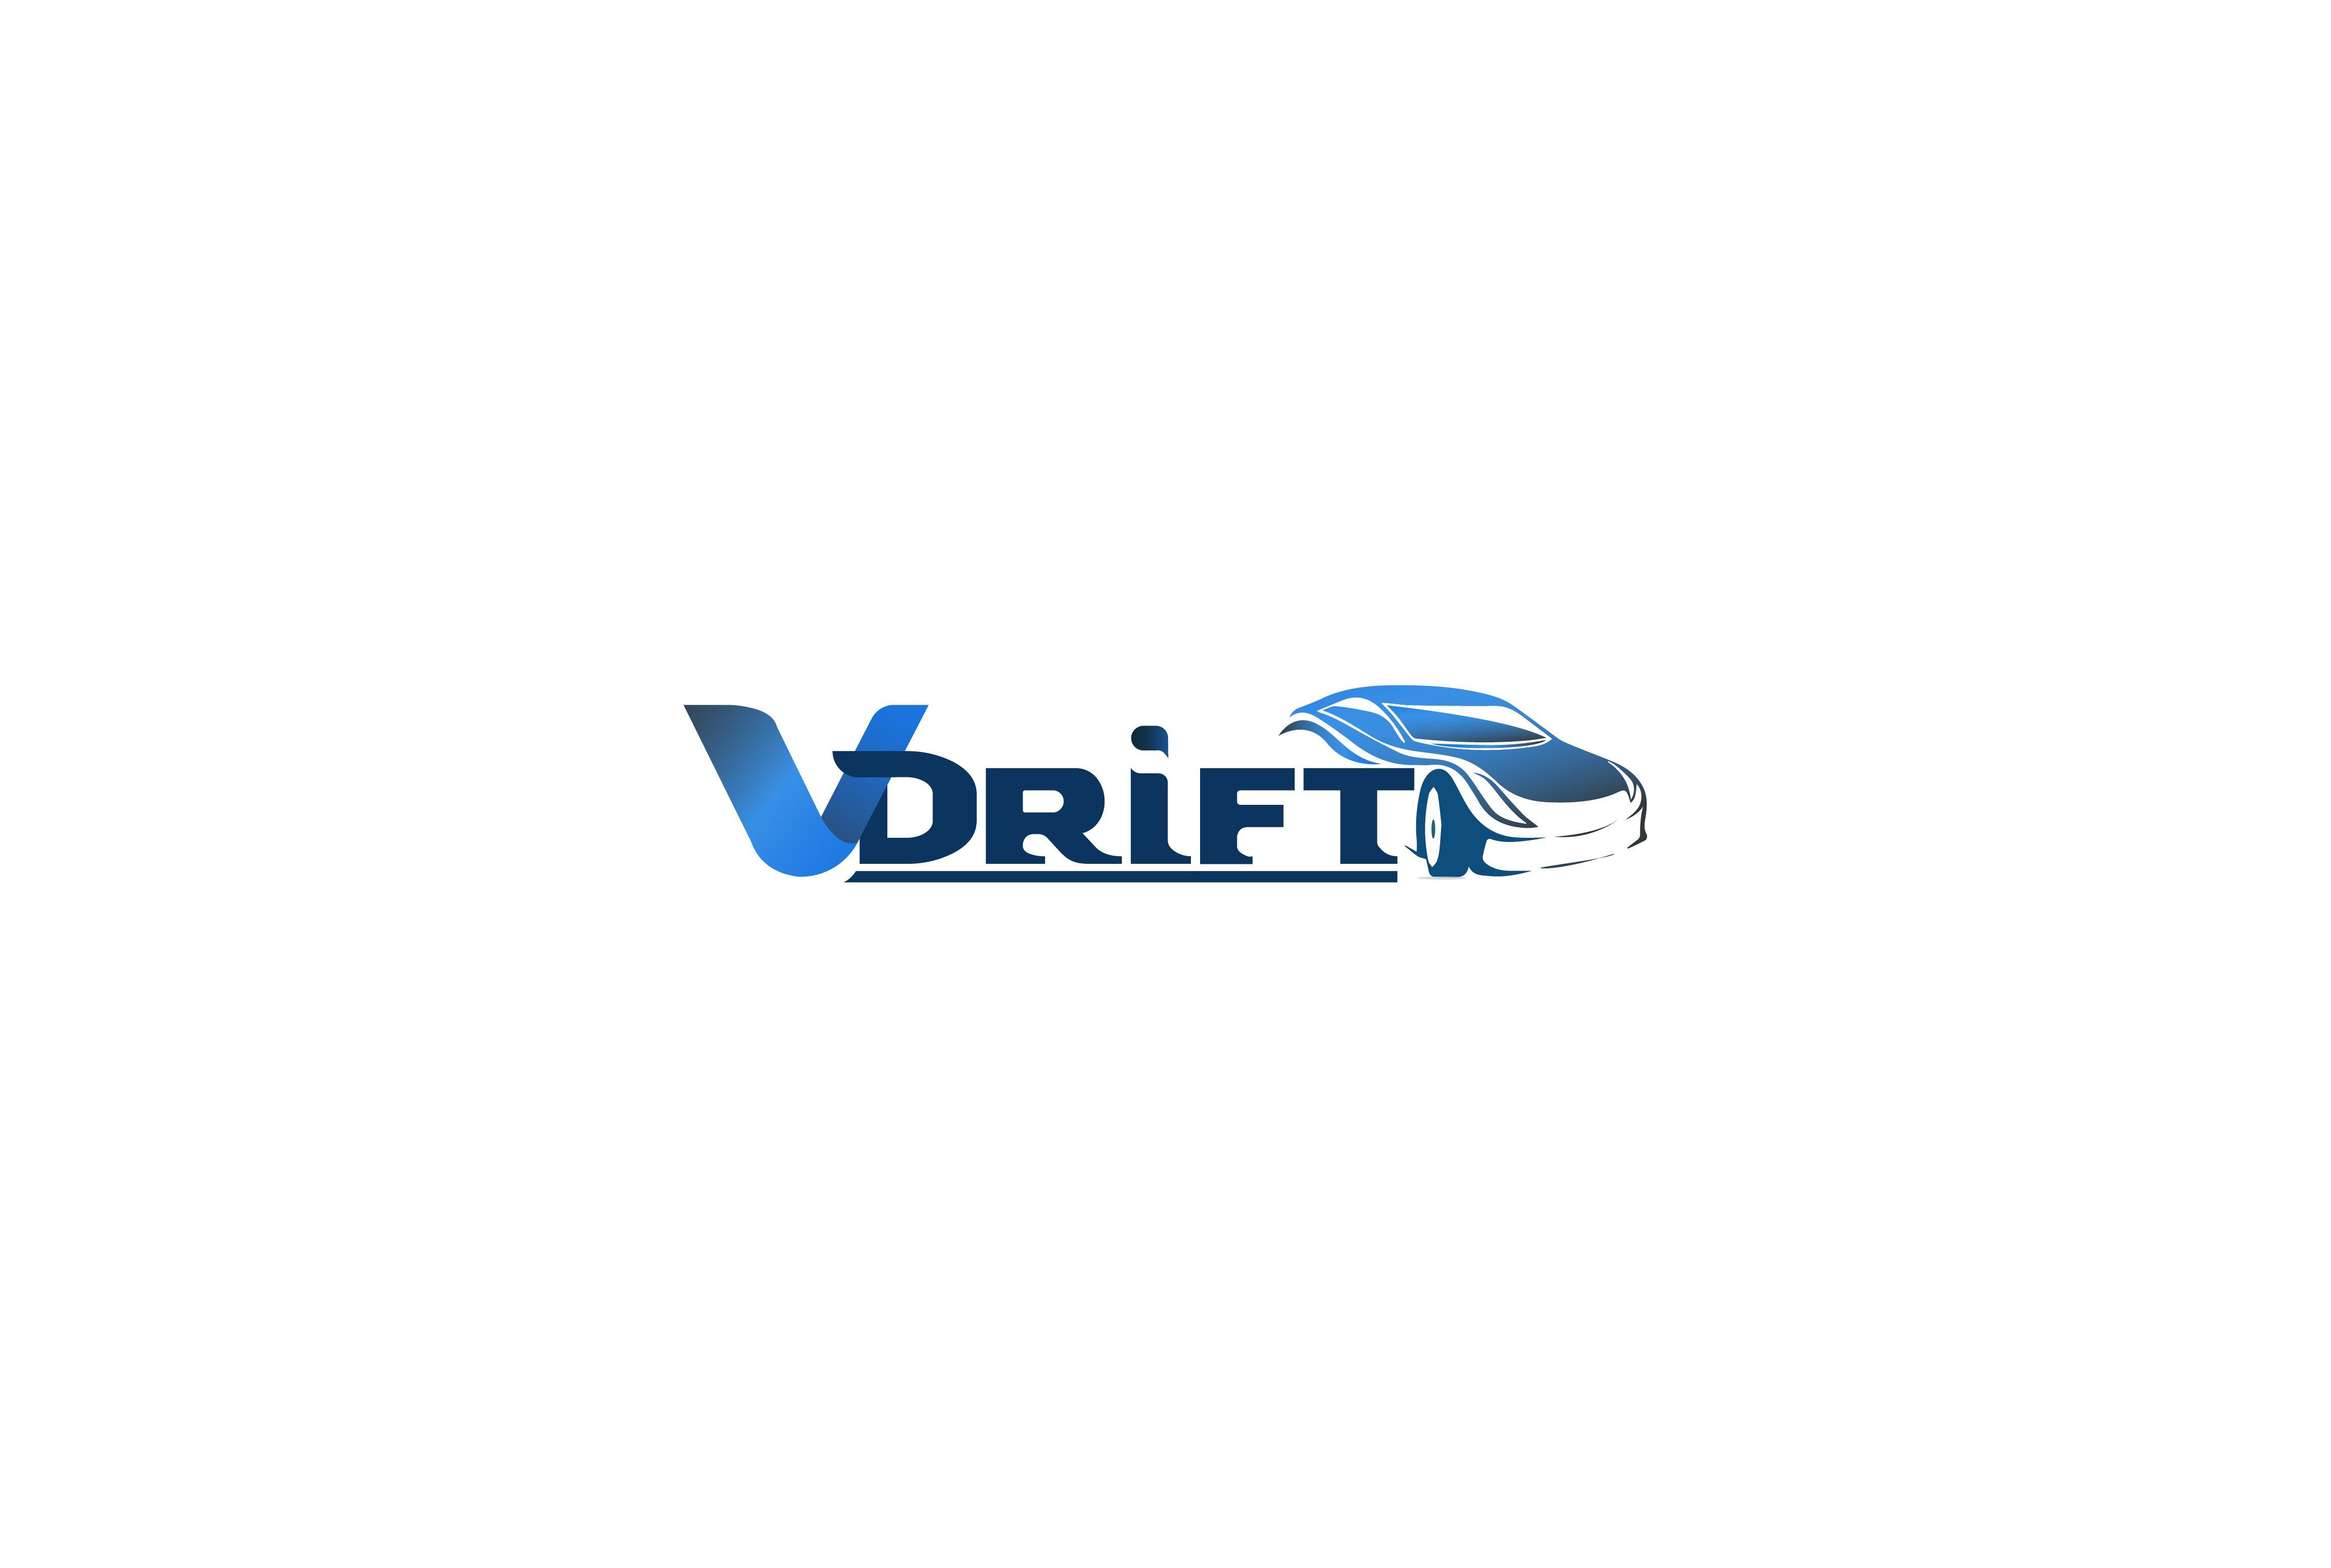 CC Game Logo - My Proposed logo for the open source game VDrift, made